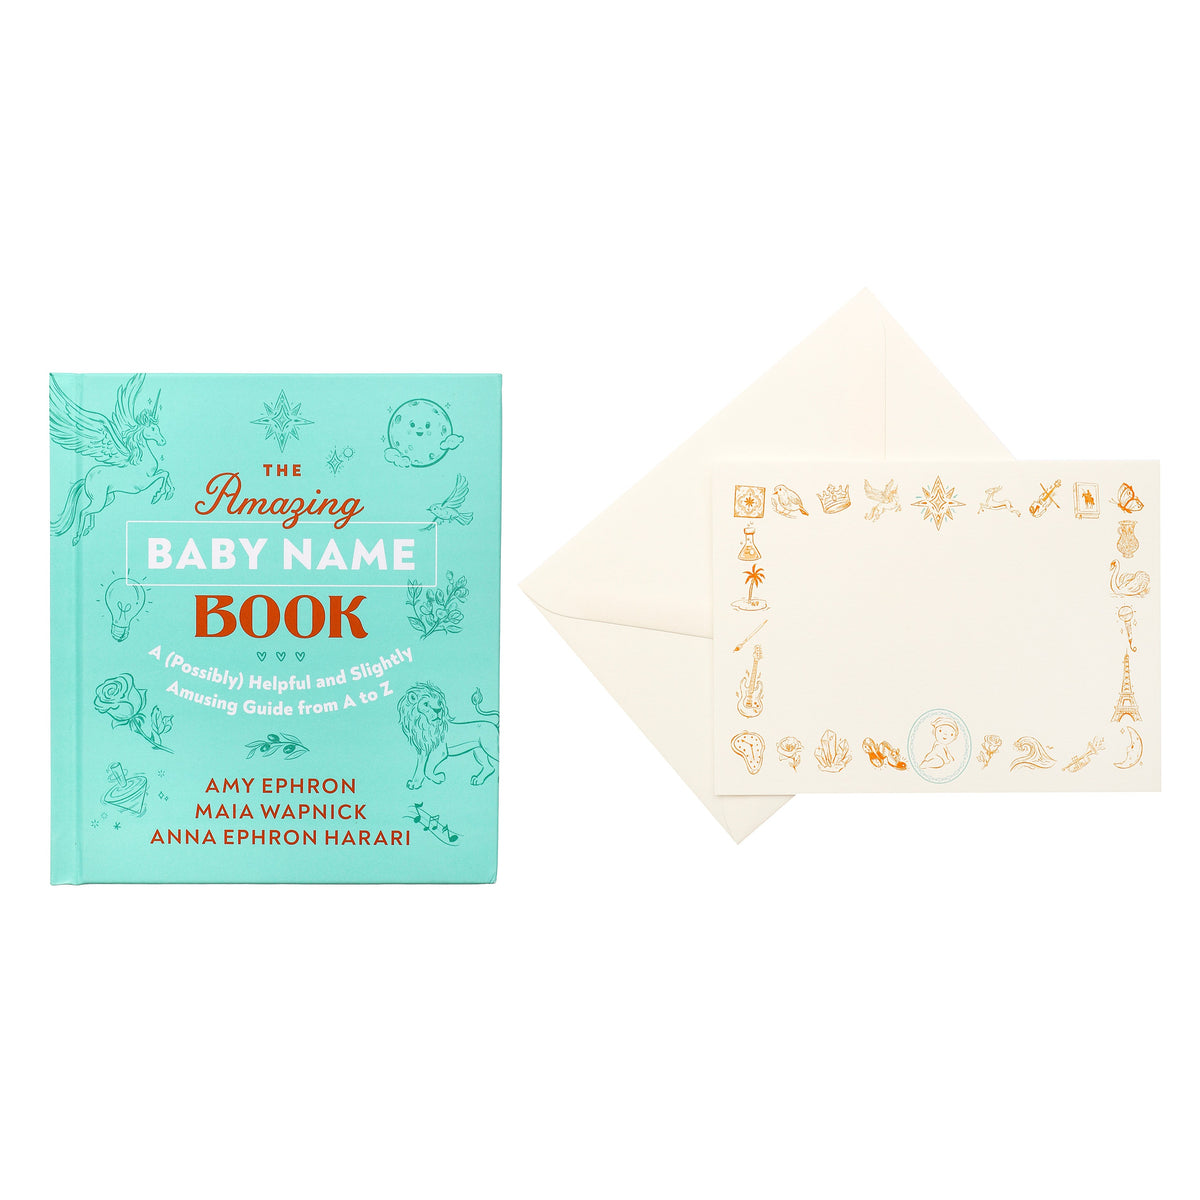 Stationery Card Set with Book in Orange